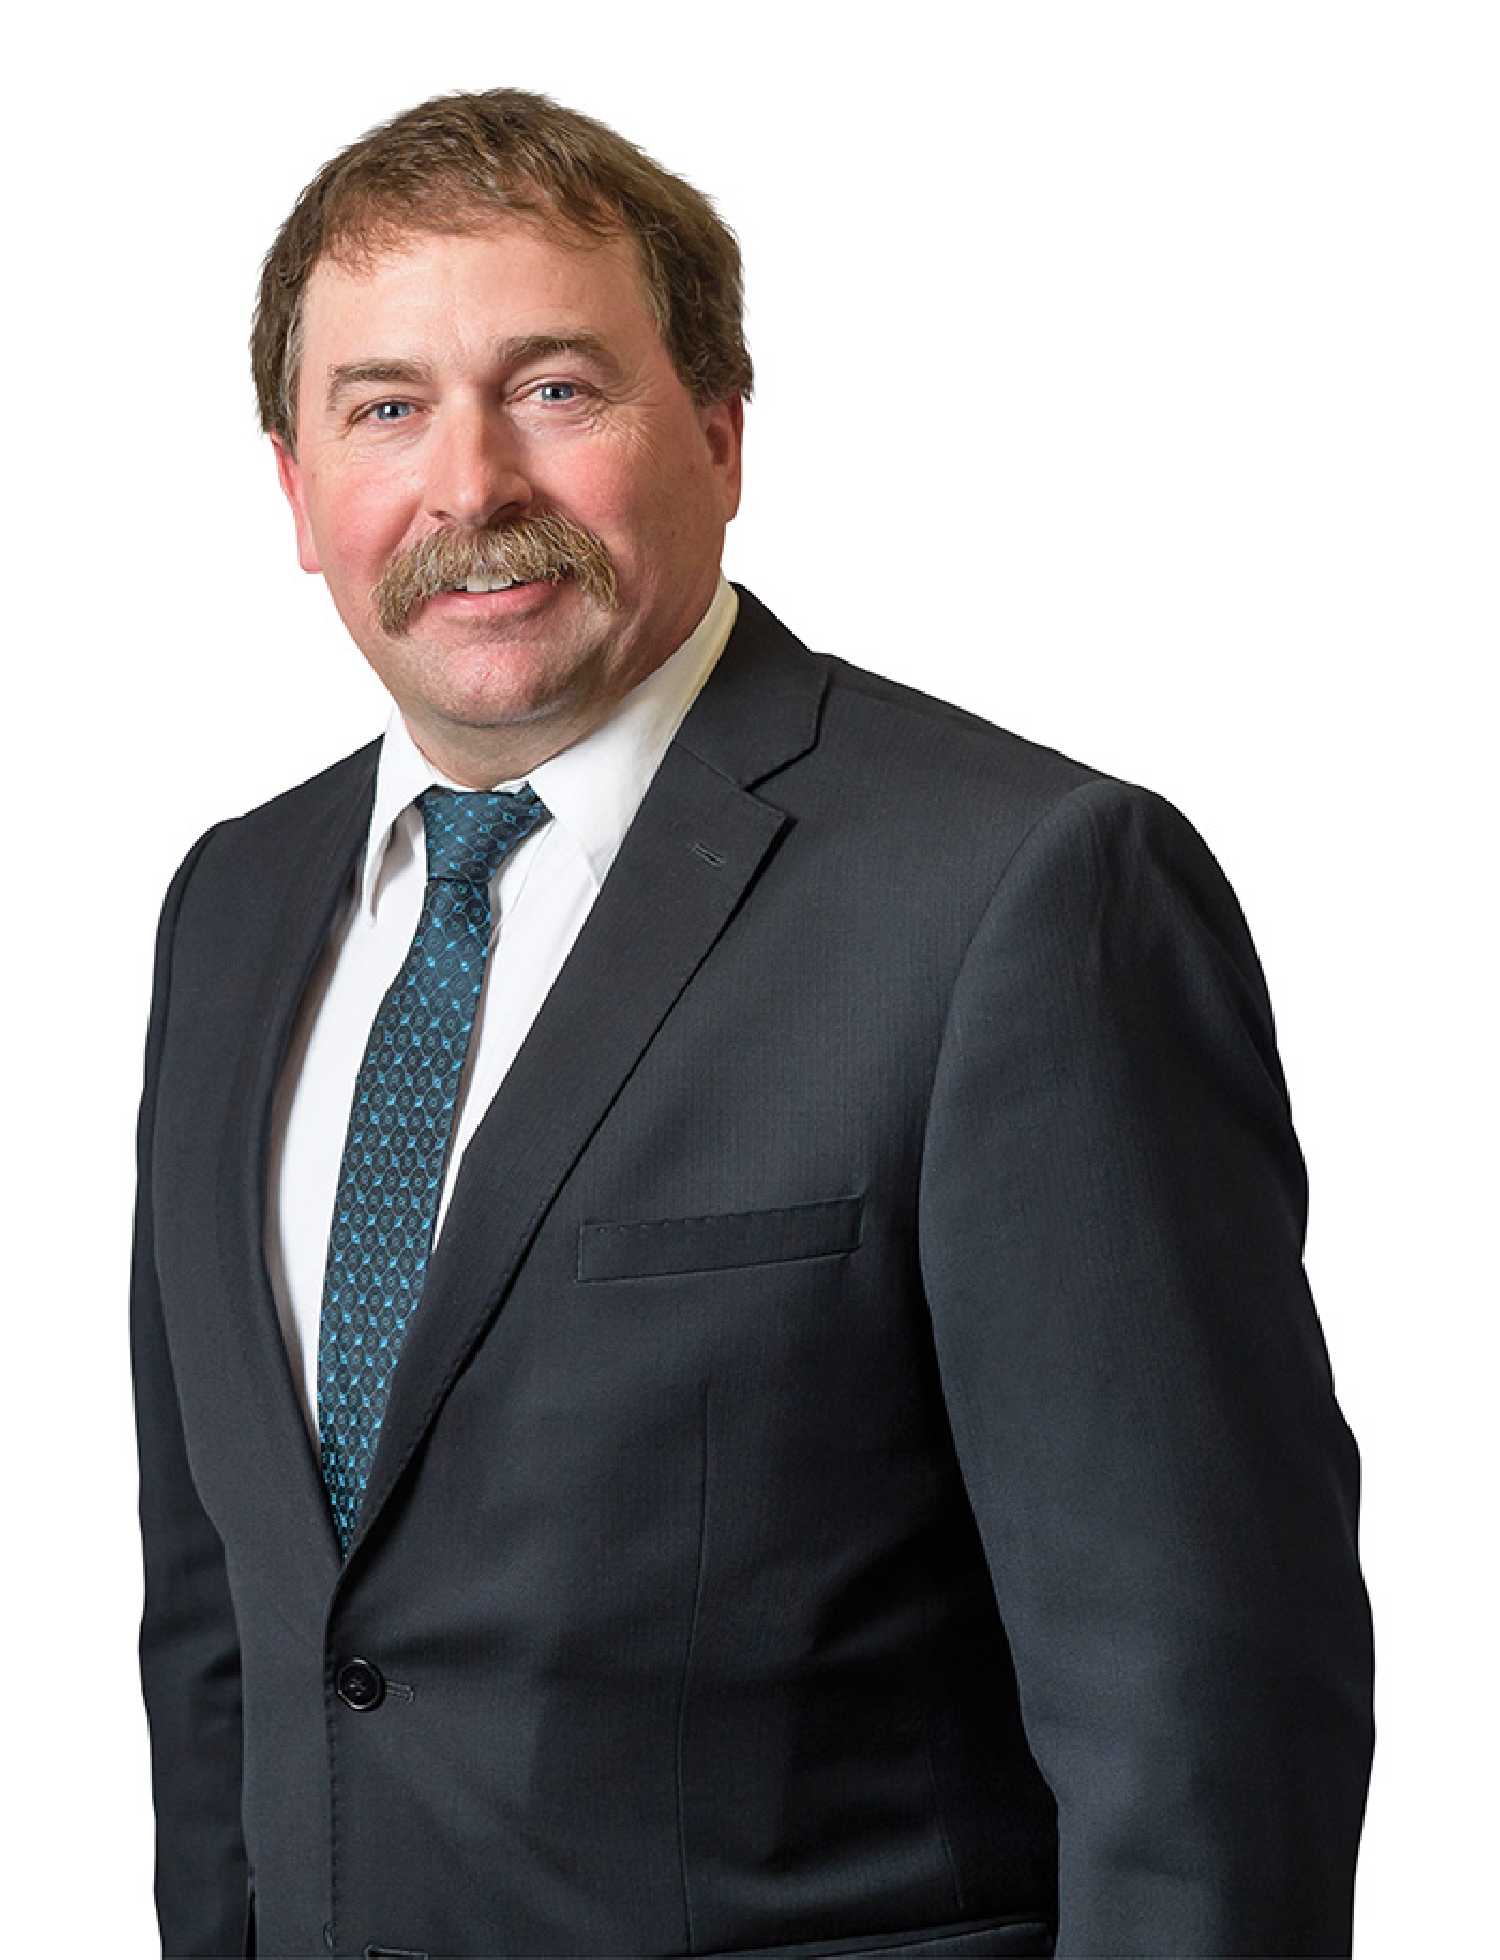 MLA for Cannington Daryl Harrison has recently been named as the Legislative Secretary to the Minister of Energy and Resources.